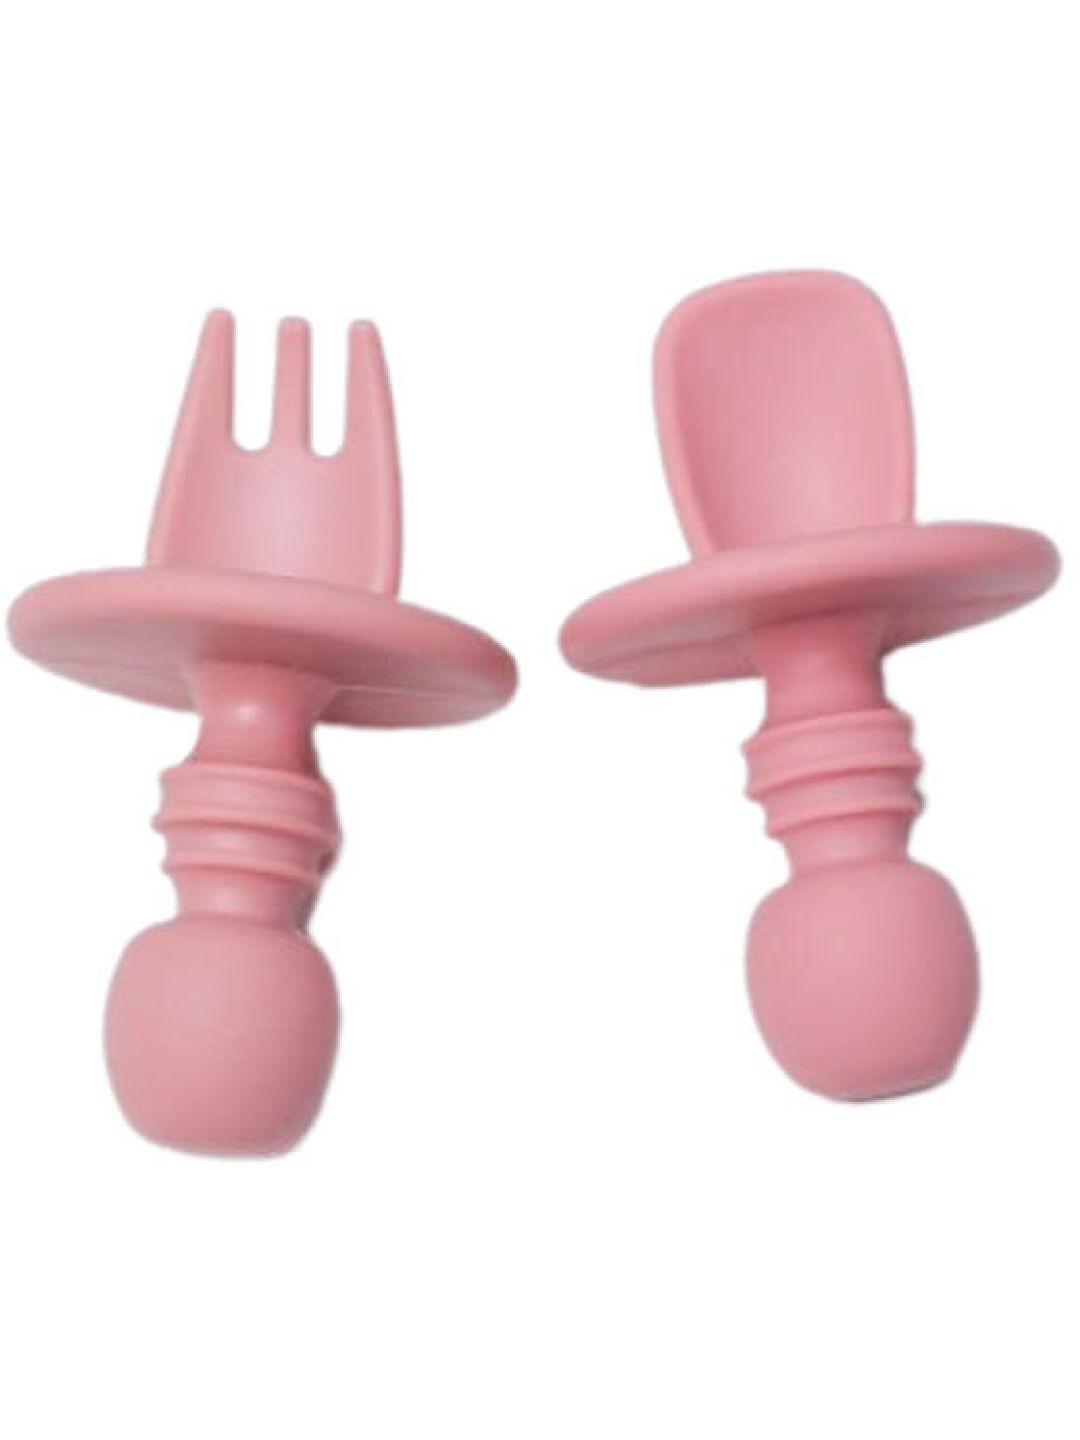 The Baby Basket Silicone Chewtensils